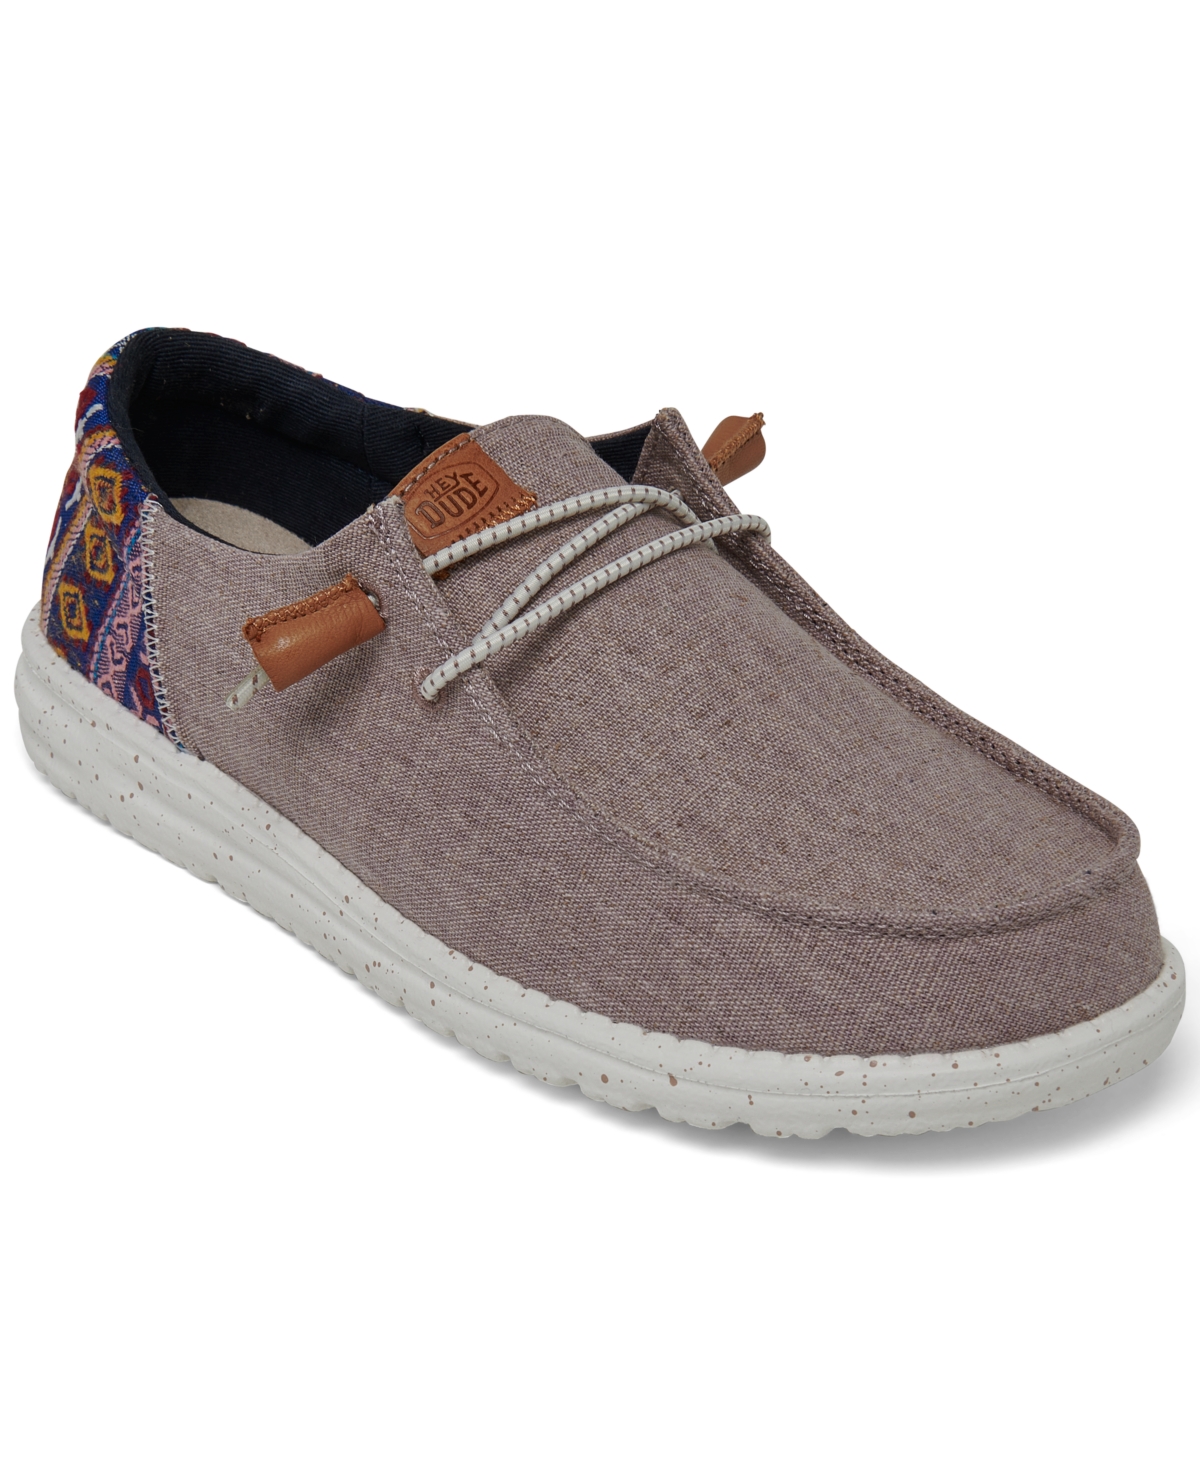 Women's Wendy Funk Casual Moccasin Sneakers from Finish Line - Baja Lilac